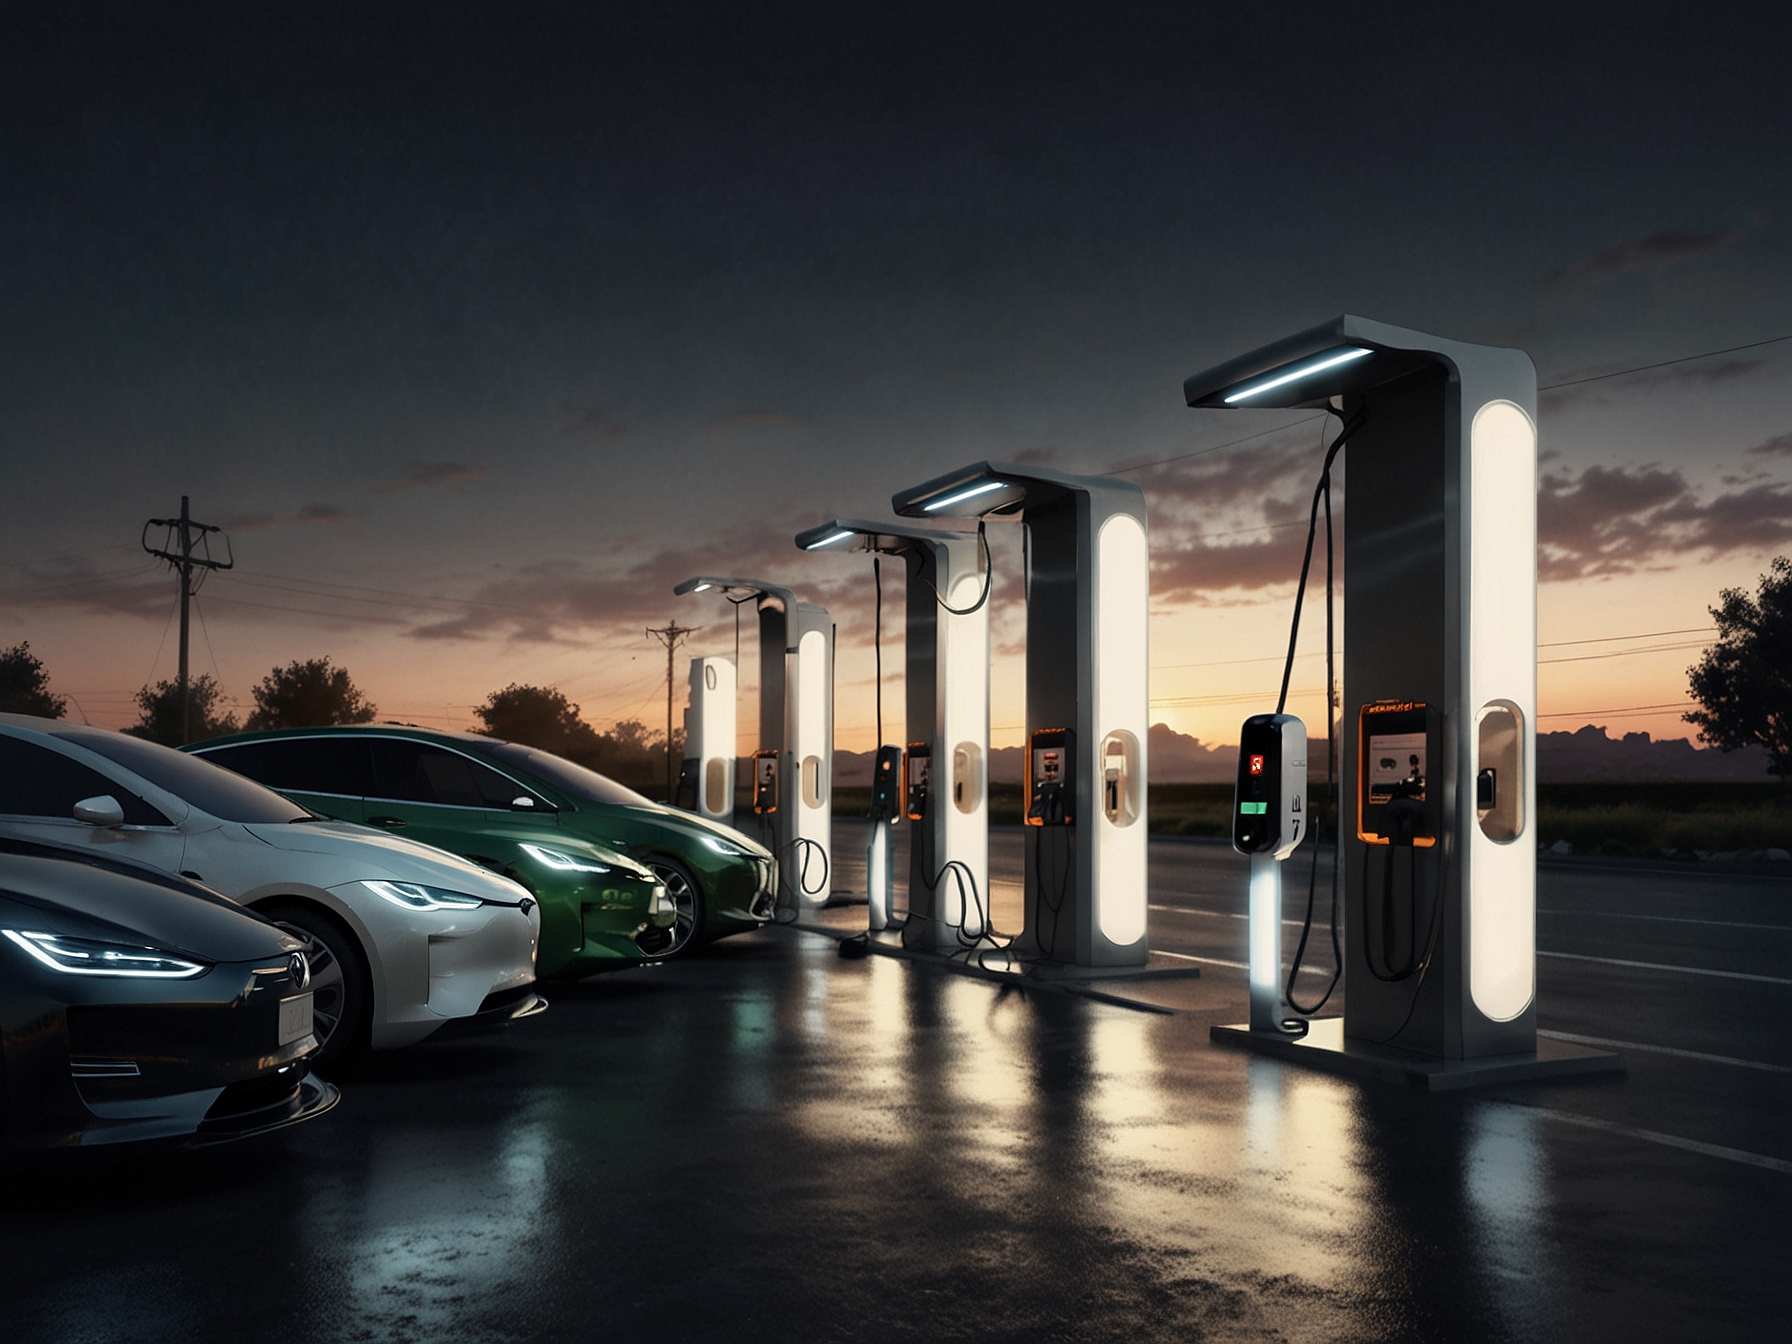 An electric vehicle charging station with several modern EVs parked and charging, symbolizing the growing infrastructure and the shift towards sustainable transportation.